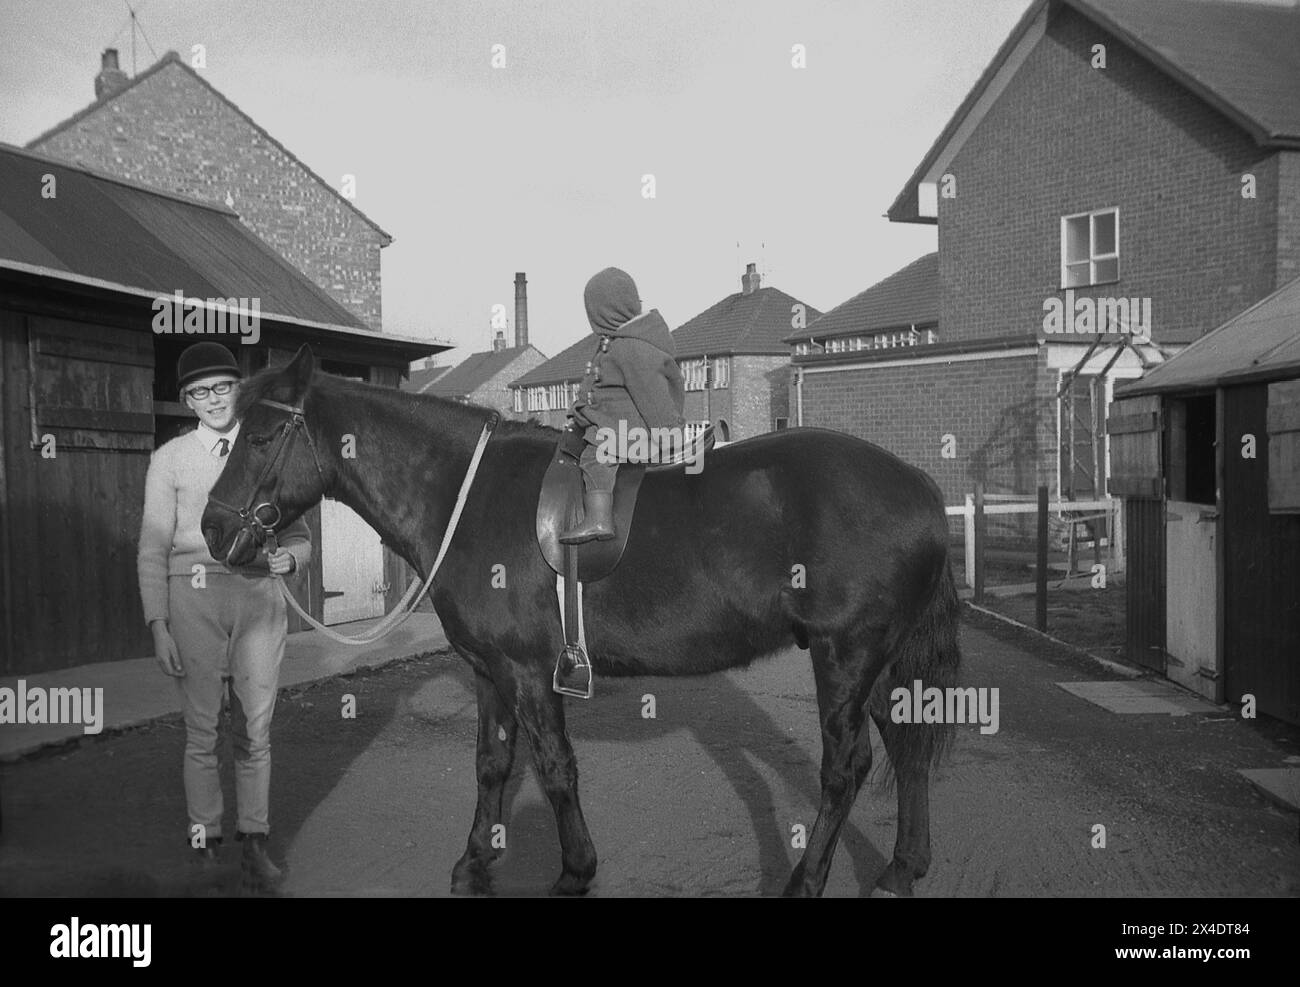 1960s, historical, outside at a suburban riding school, an infant child sitting on a horse by the stables, the horse's head being held a teenage girl, England, UK. Stock Photo